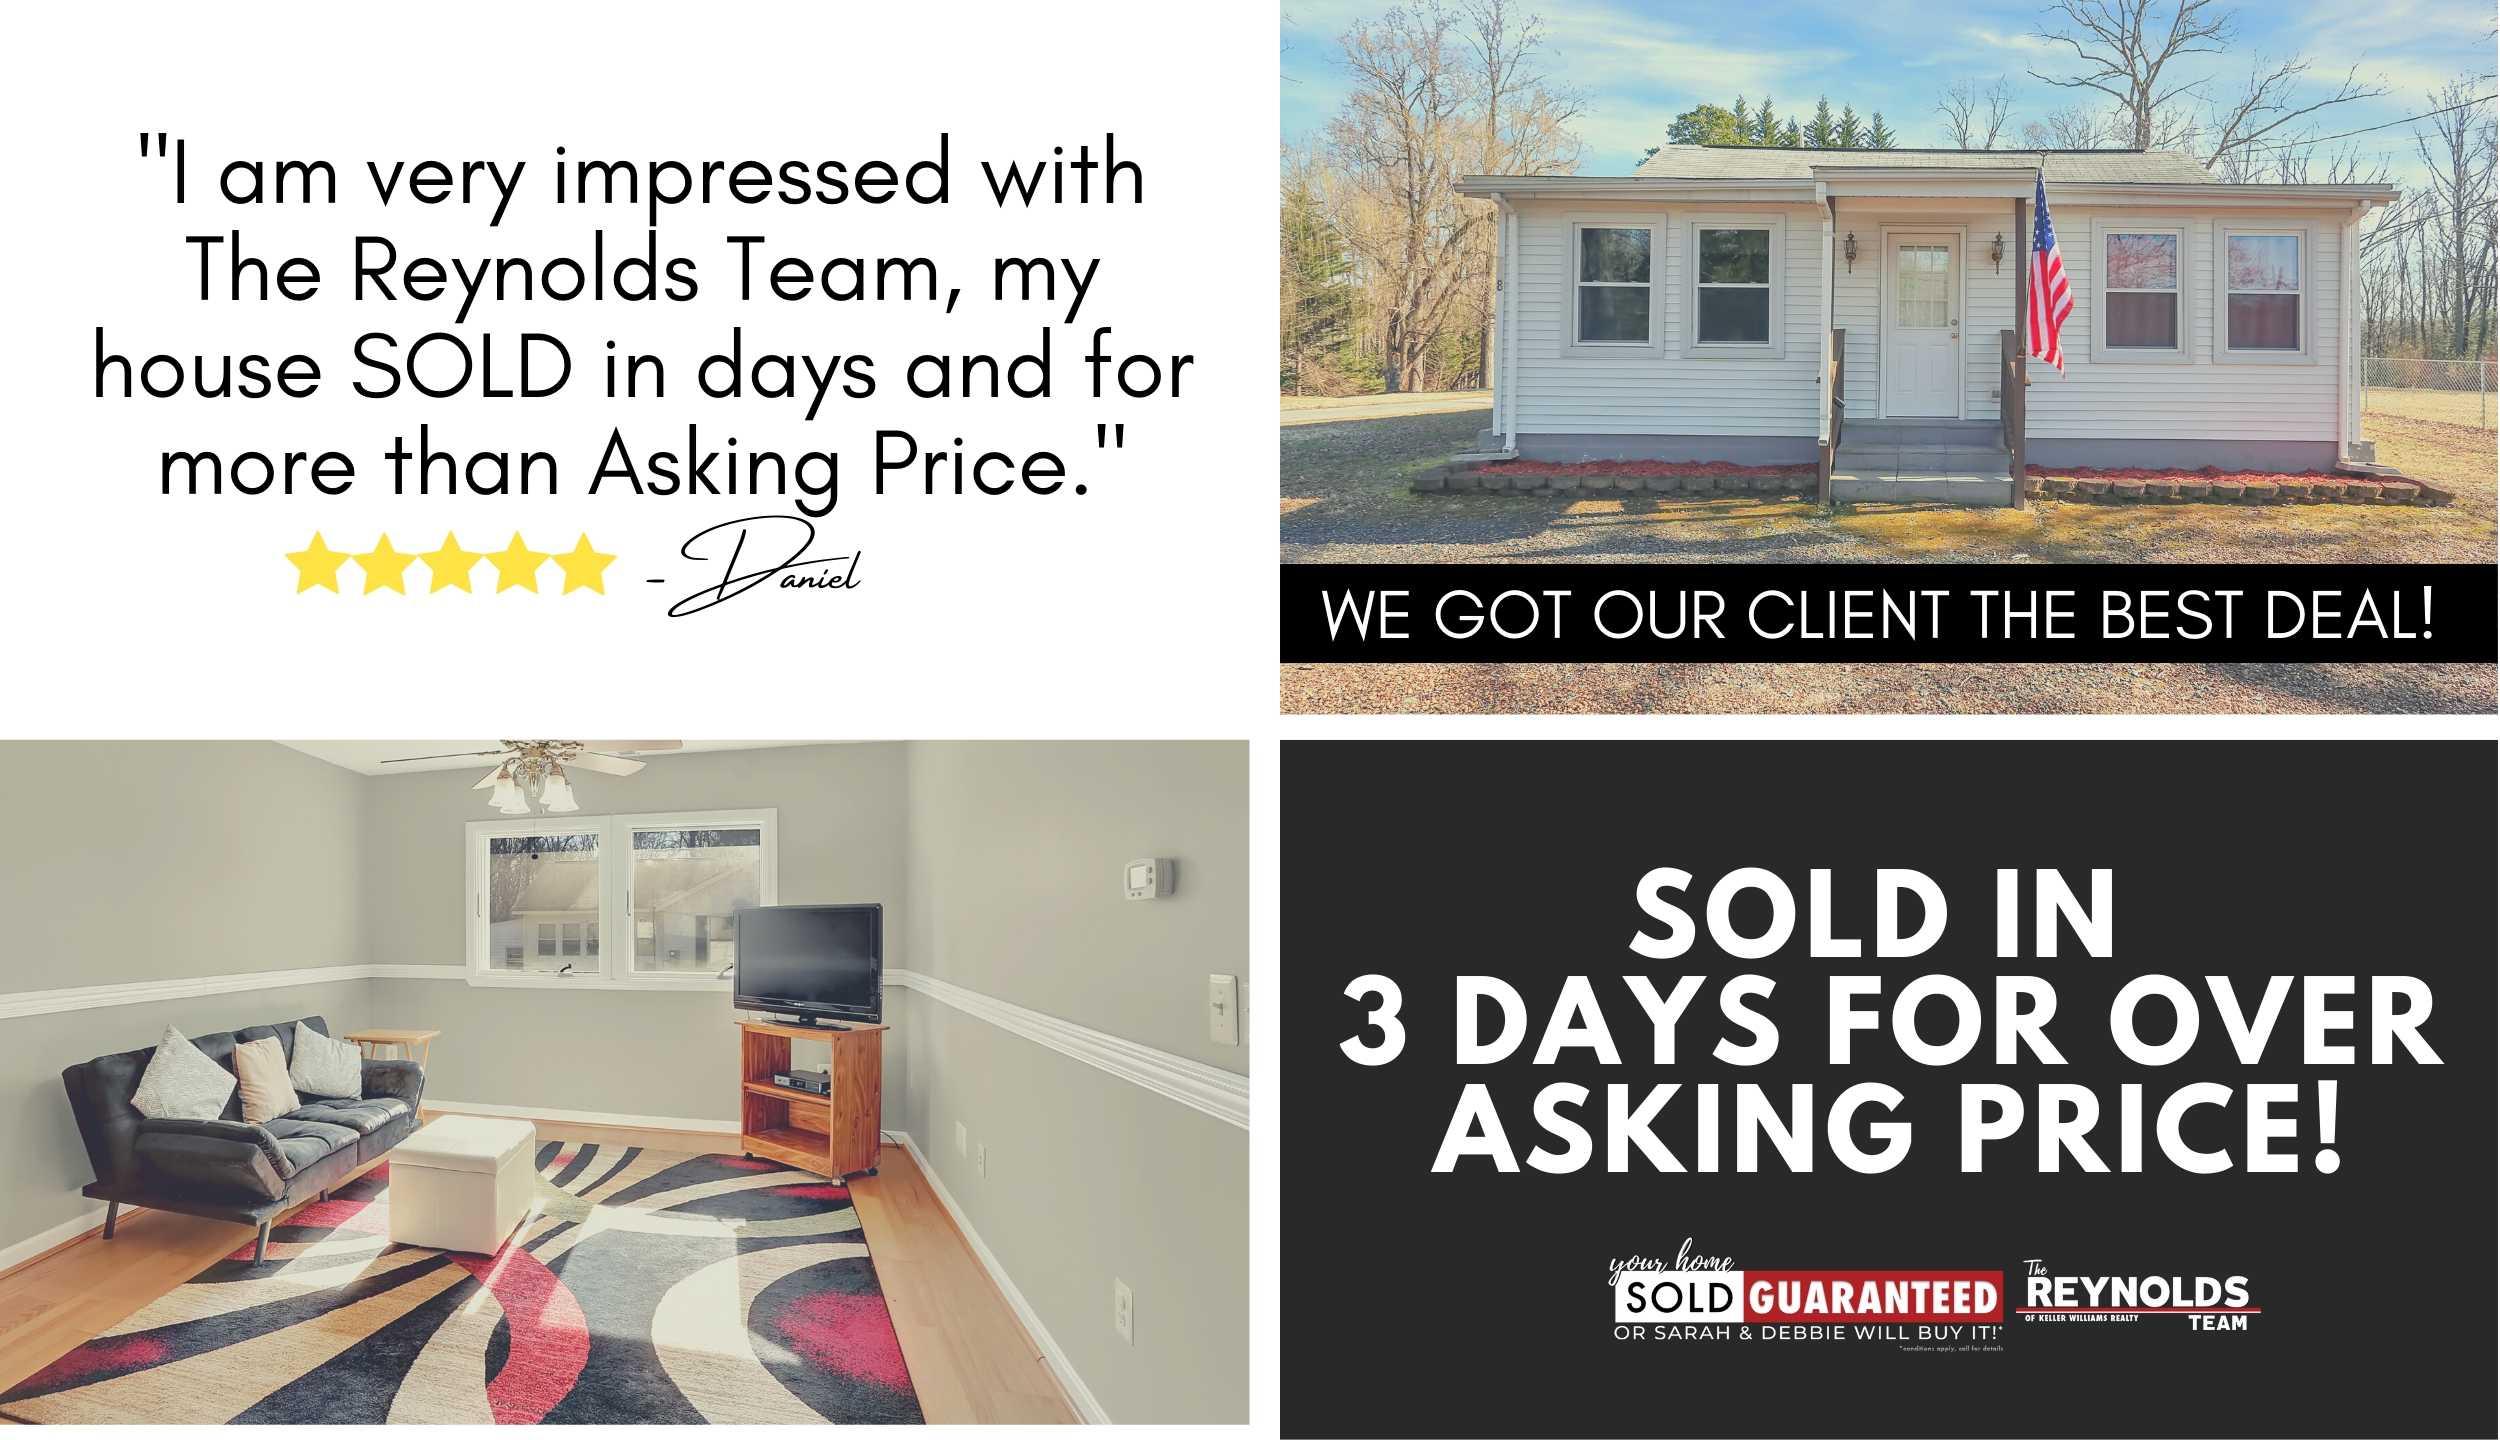 We Got Our Client The BEST Deal! SOLD In 3 Days For OVER Asking Price!